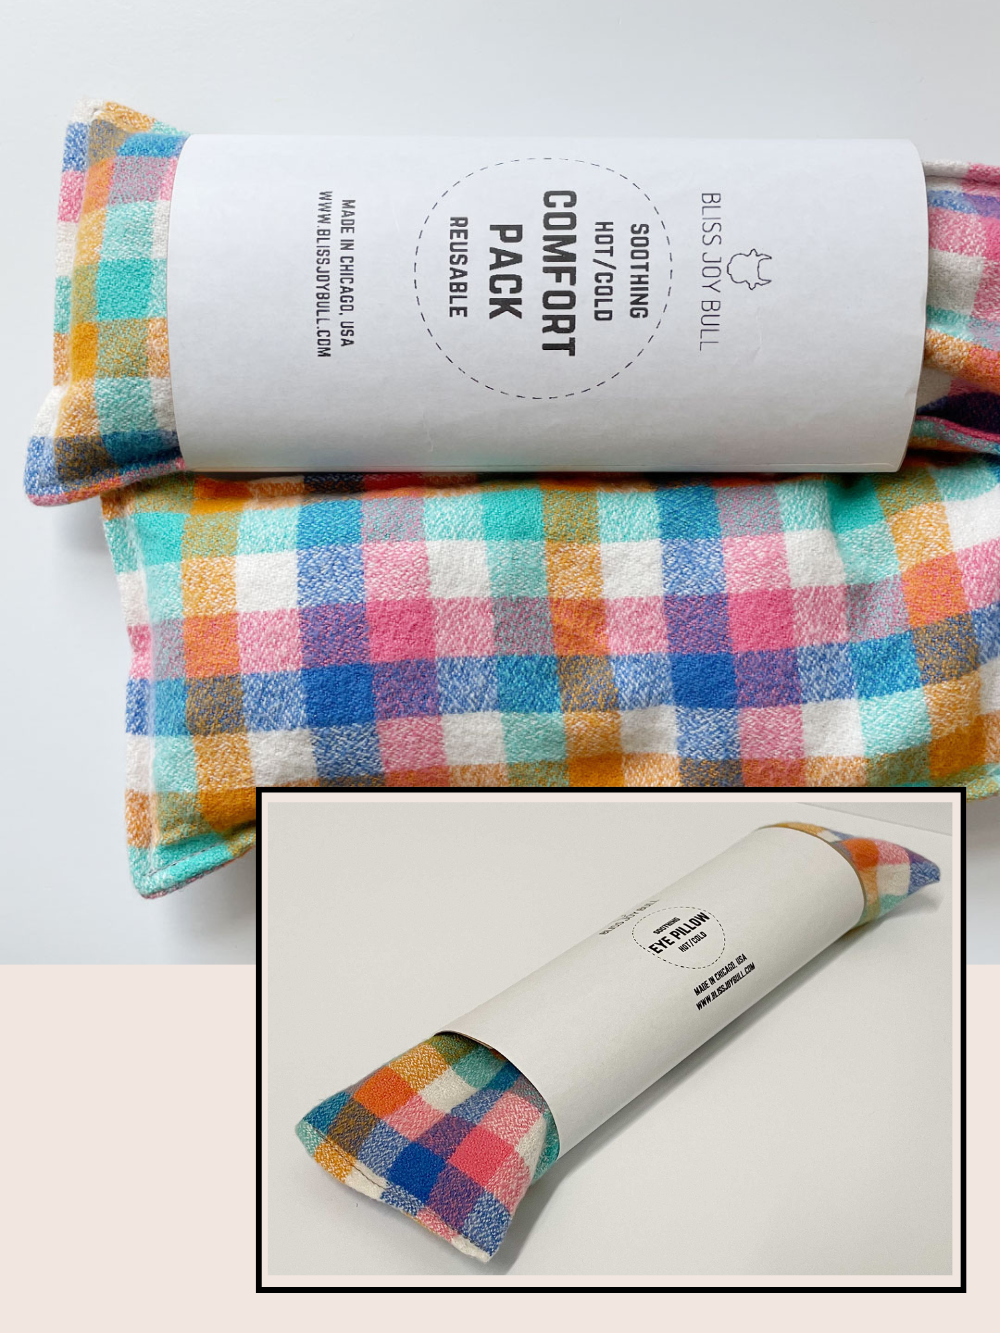 Two grain bags filled with cherry pits; one for shoulders and one eye pillow with white labels. In a colorful, bright plaid fabric. 